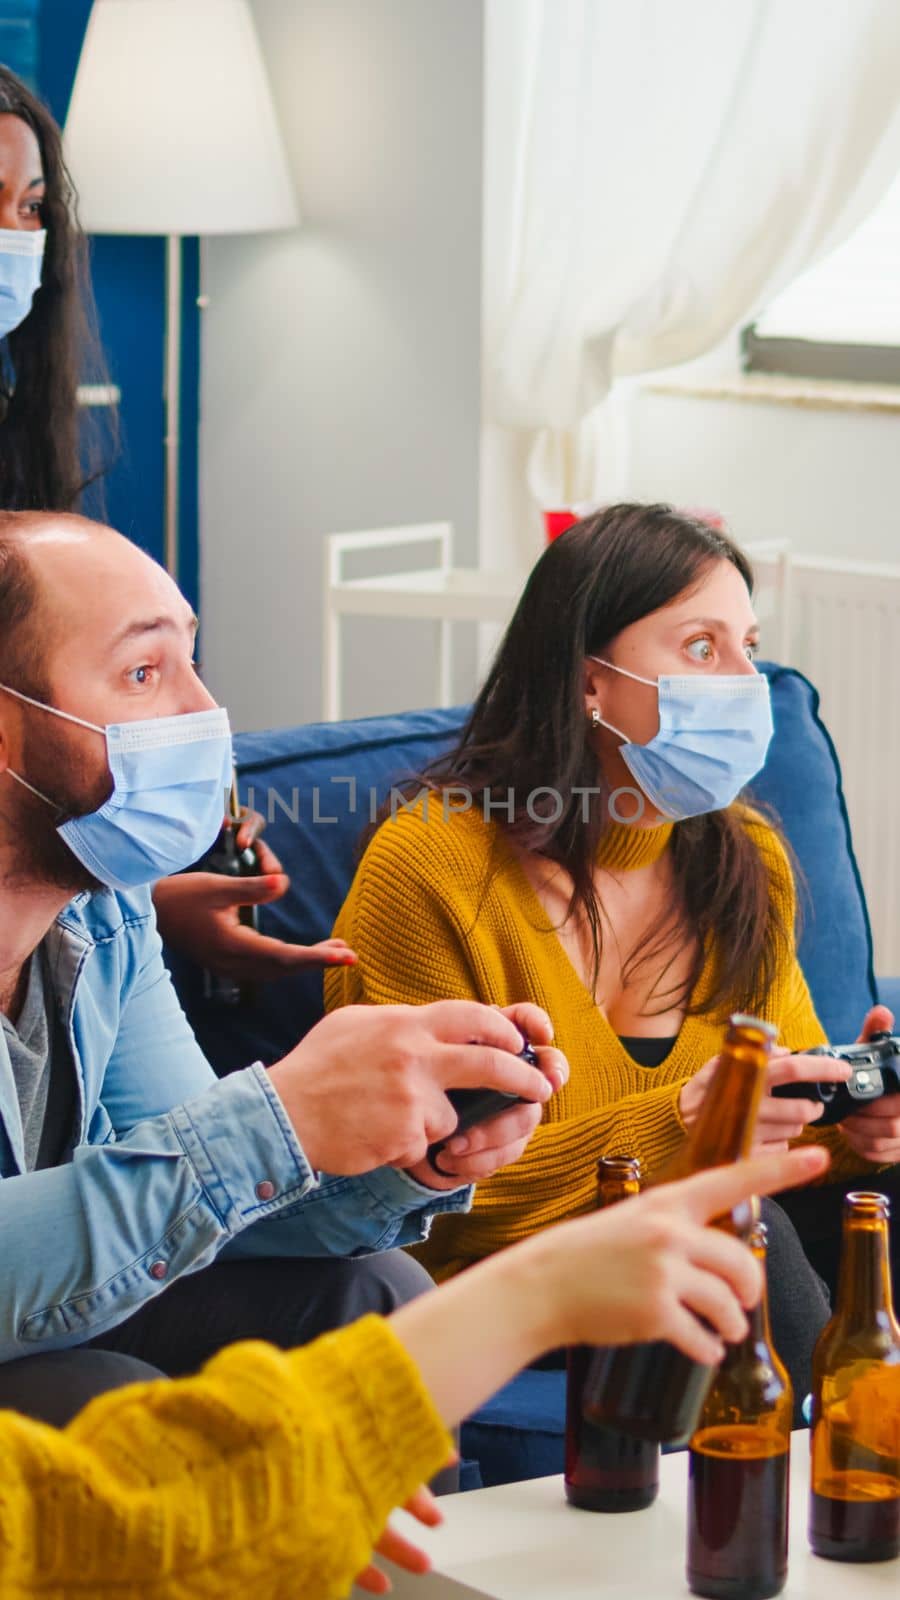 Sad friends because loosing playing video games with wireless controller wearing face mask to prevent getting sick with corona in time of social pandemic. Group of people enjoying time together.